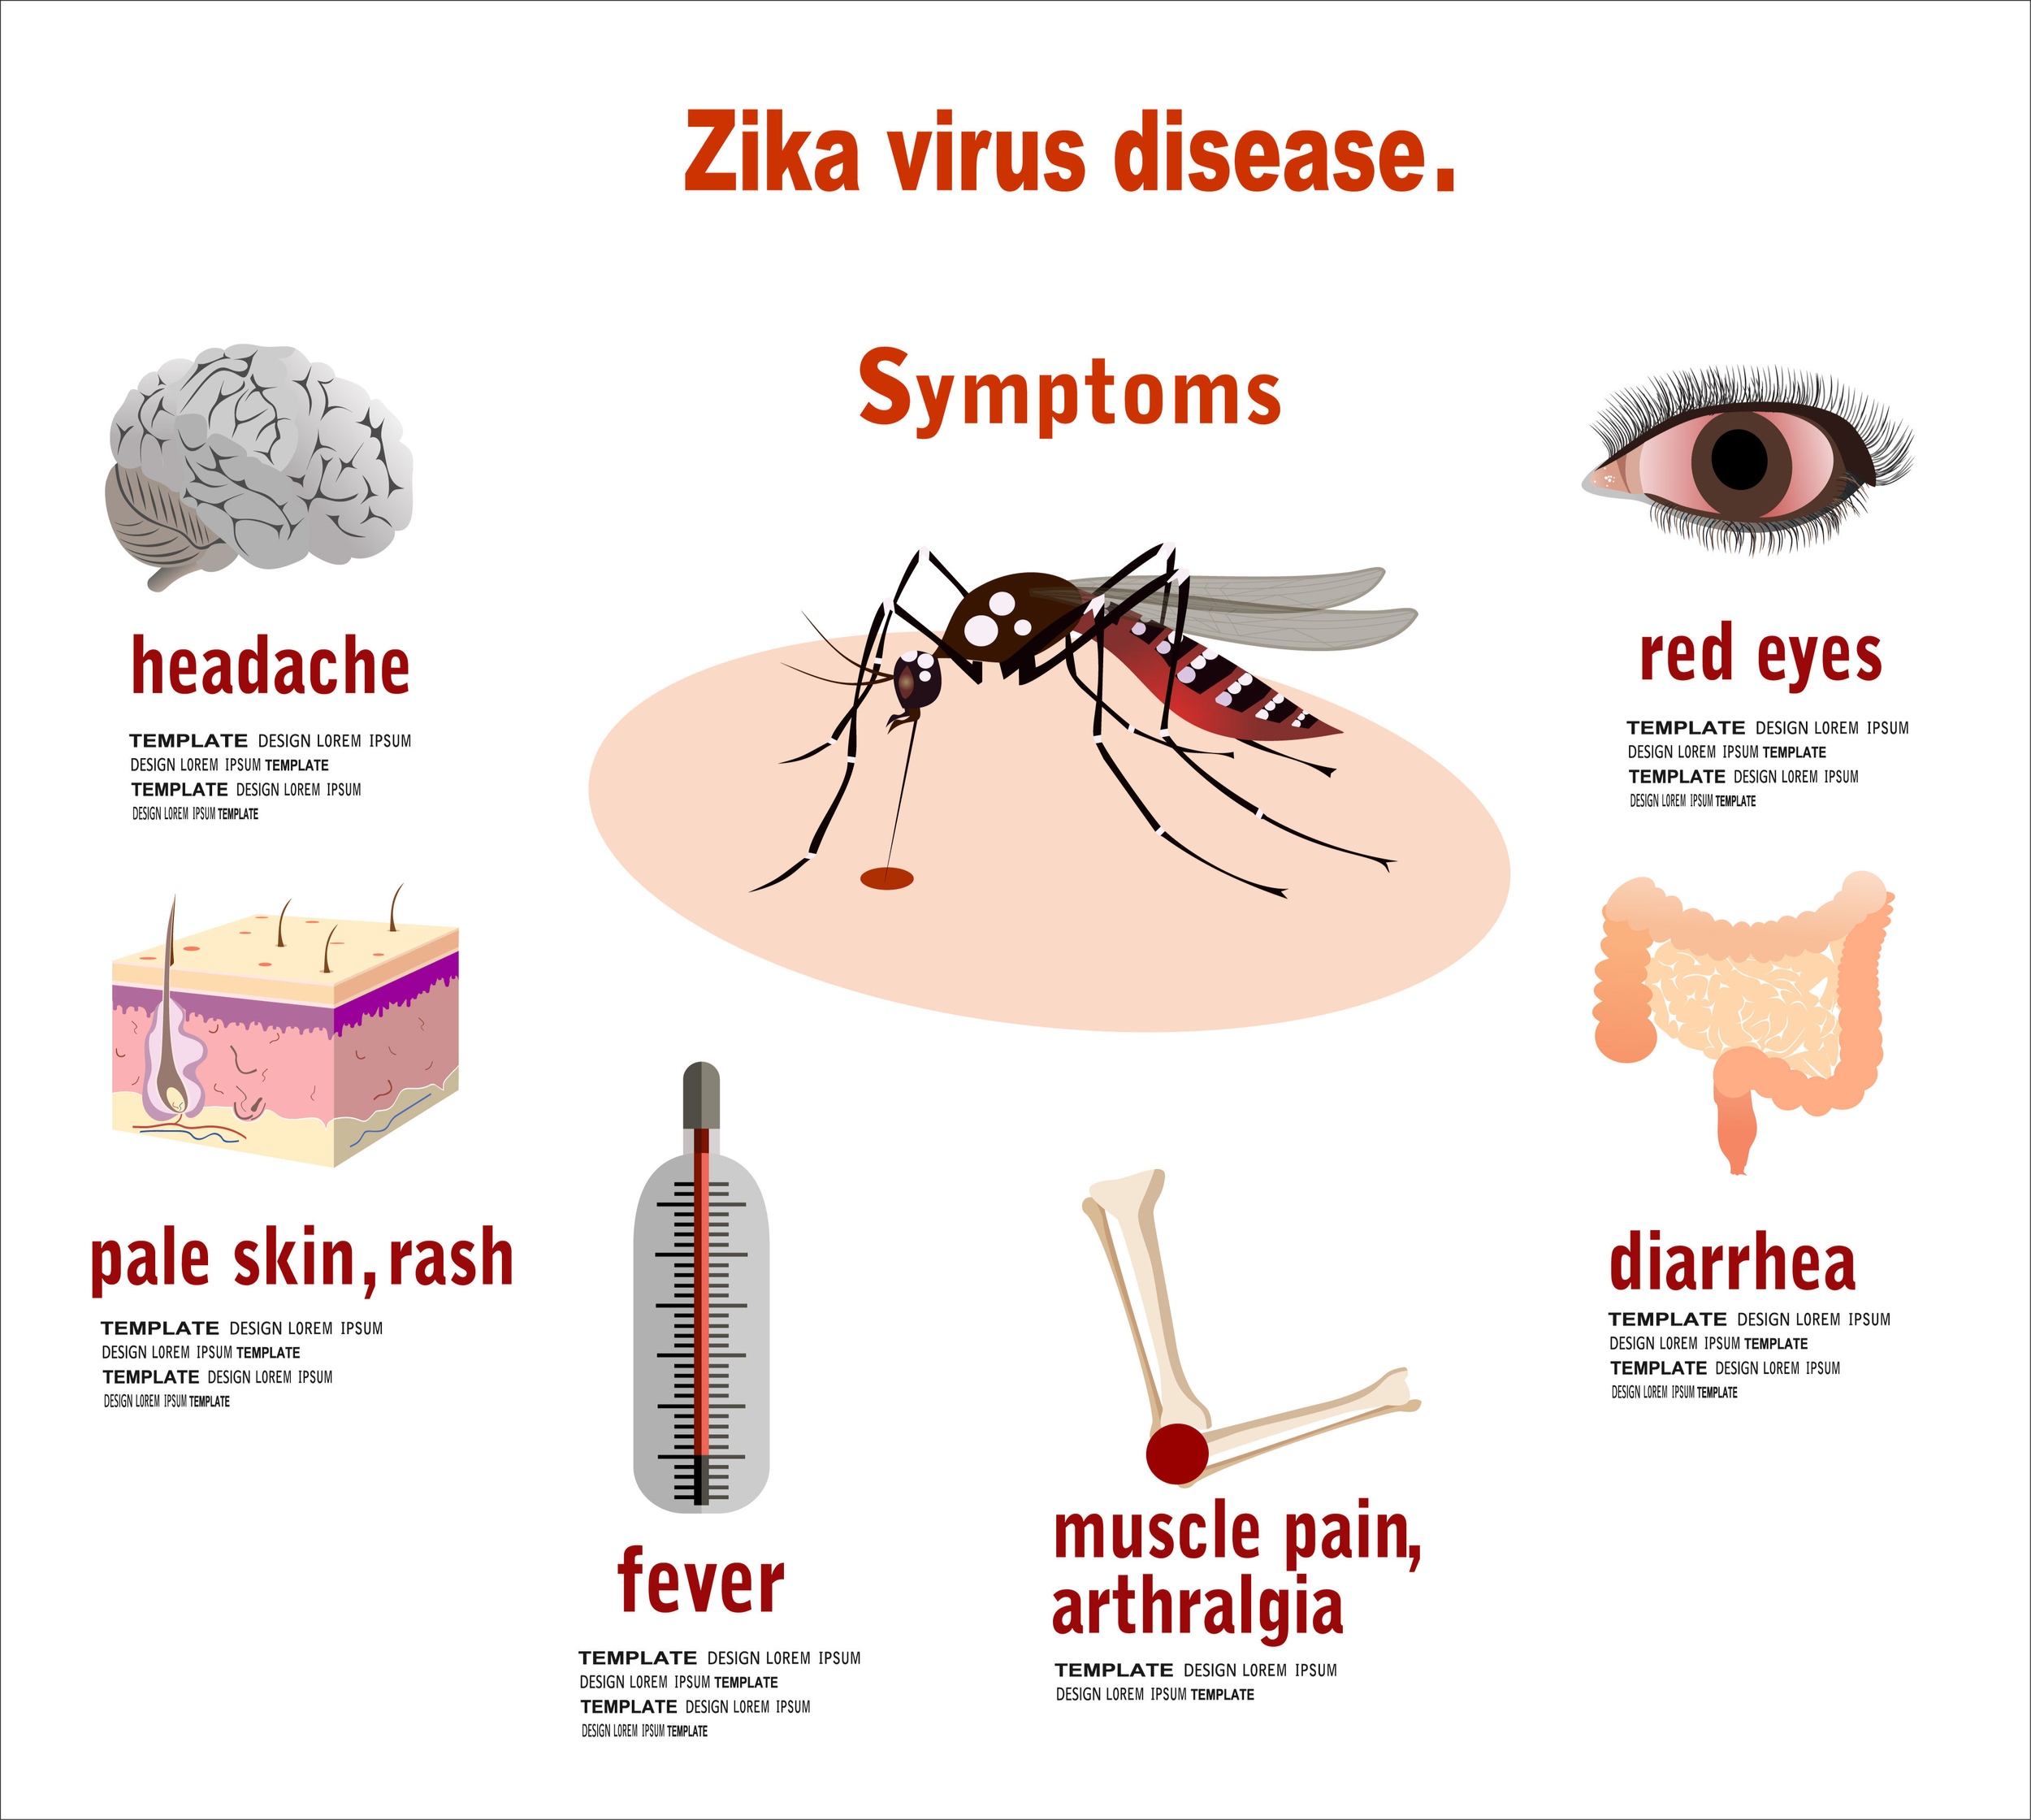 zika virus images infectious disease pictures 